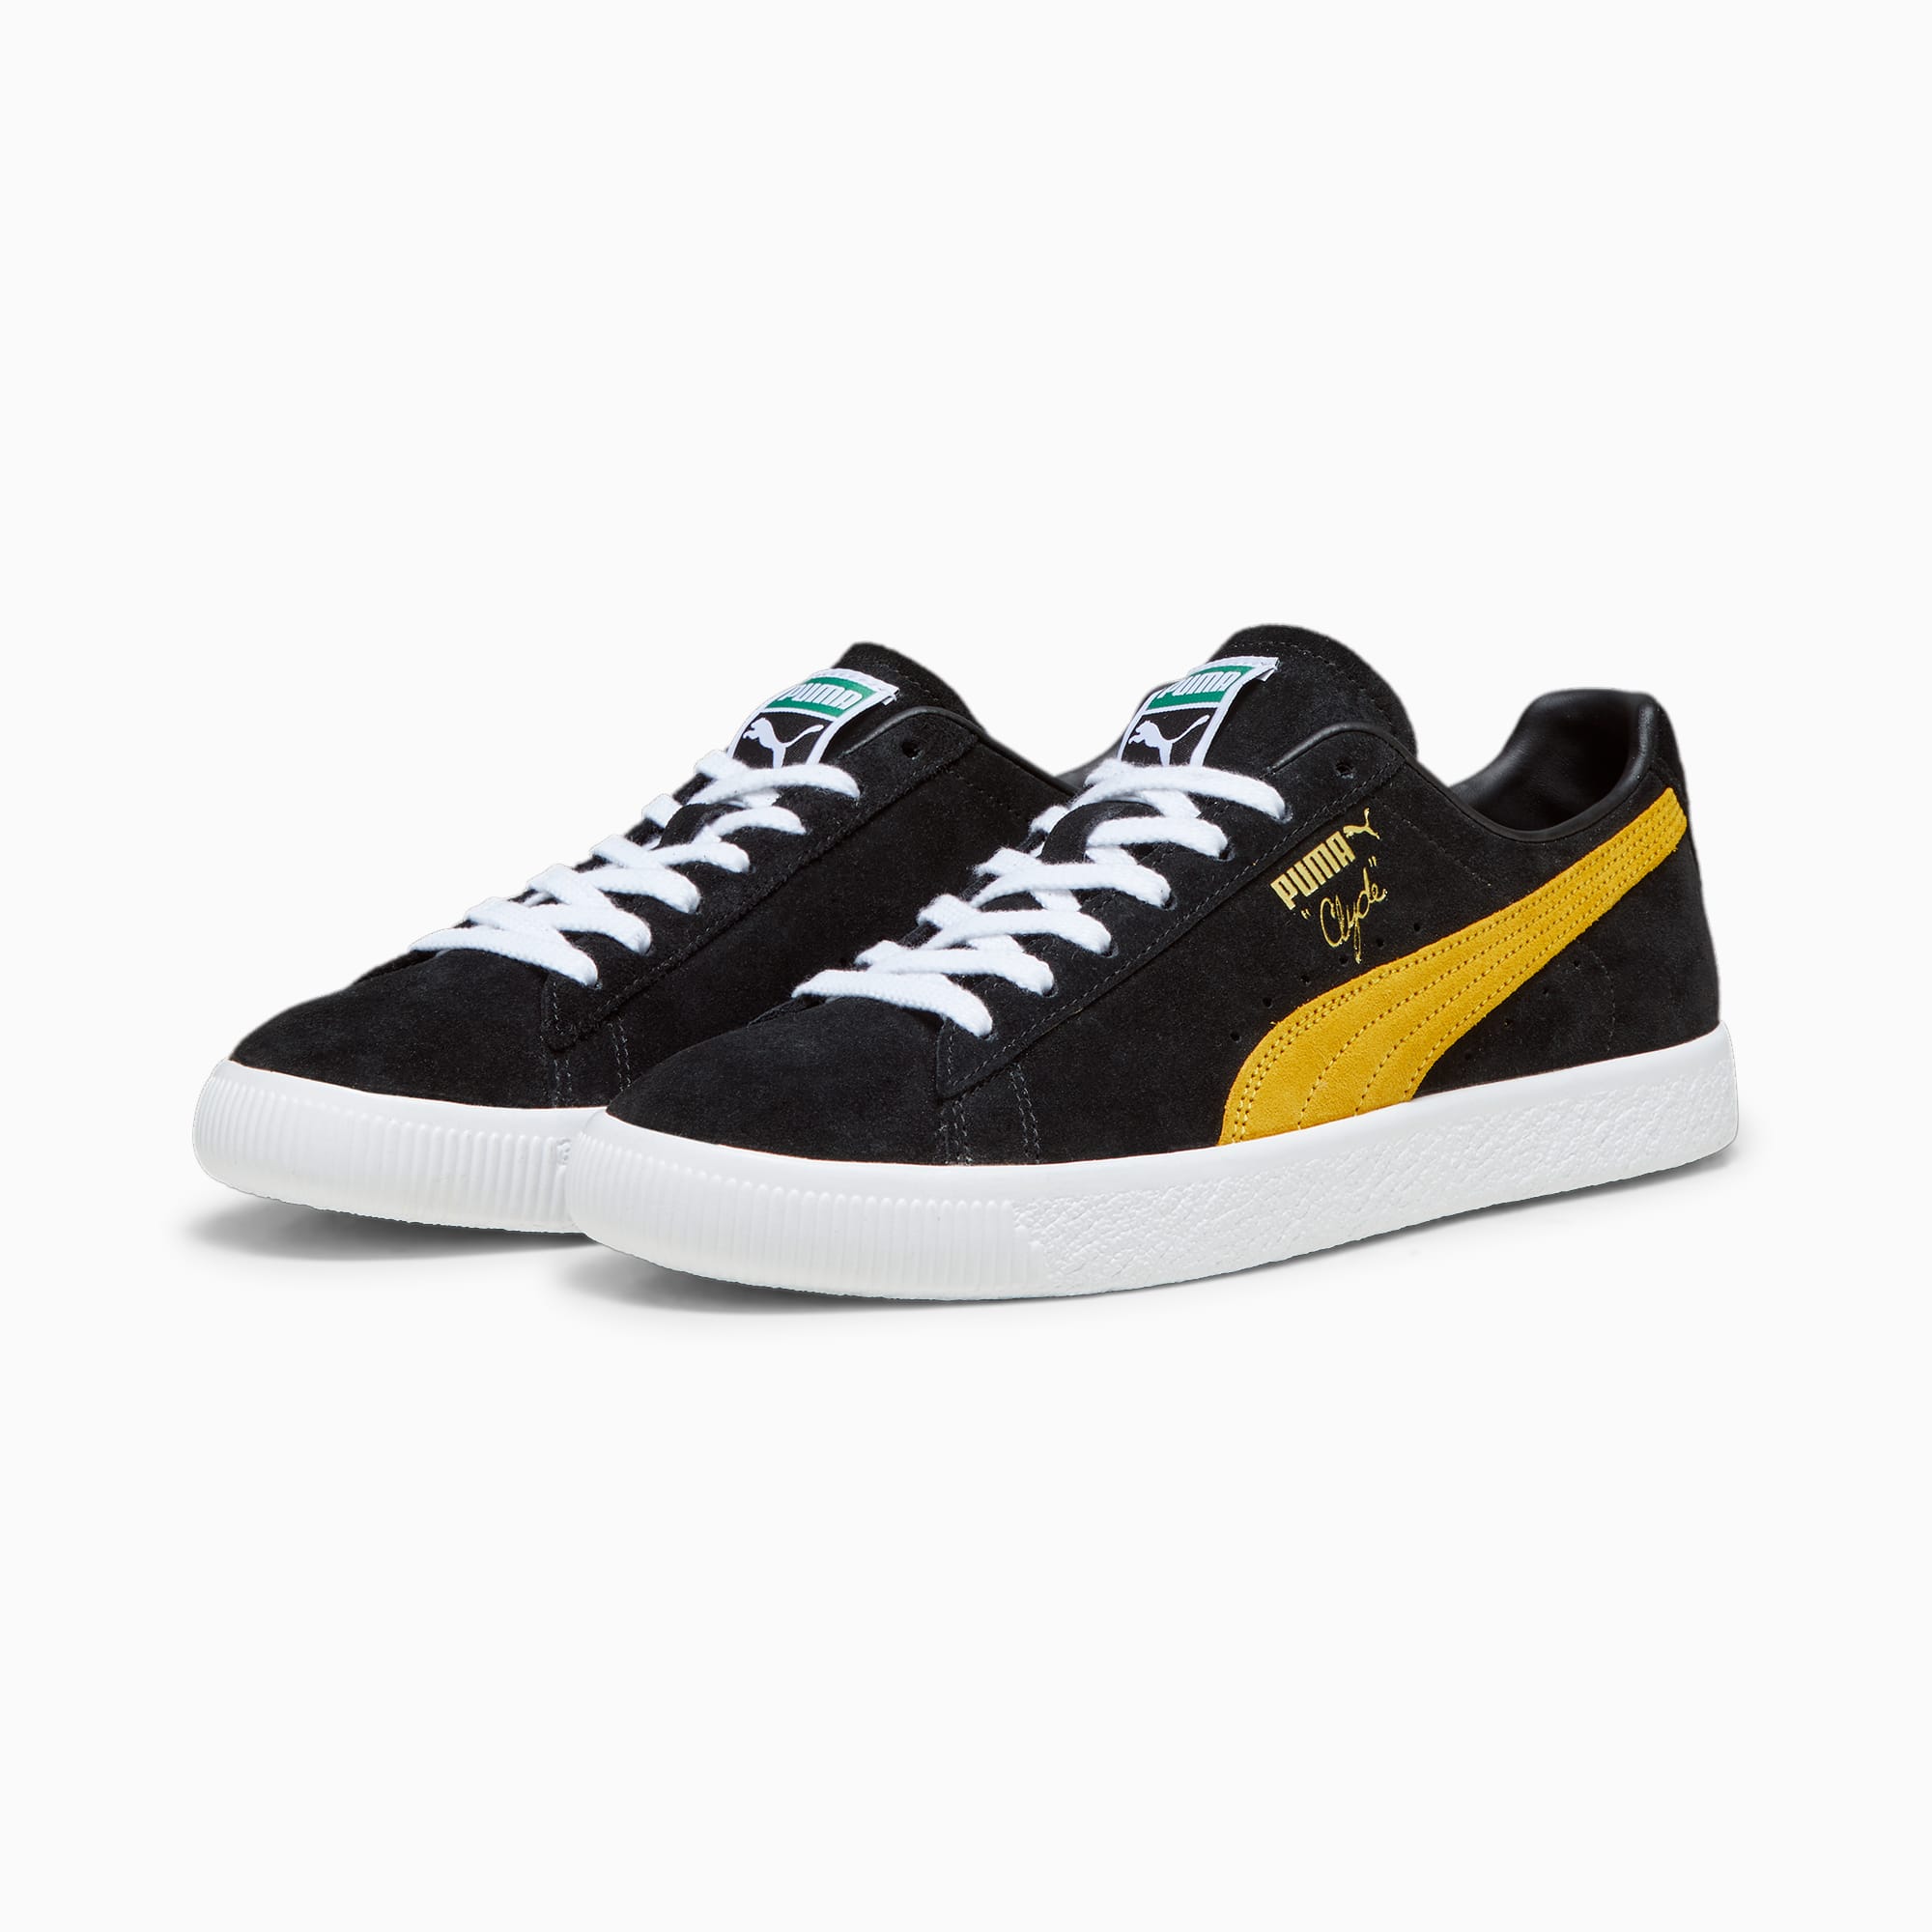 Women's PUMA Clyde OG Sneakers, Black/Yellow Sizzle, Size 35,5, Shoes